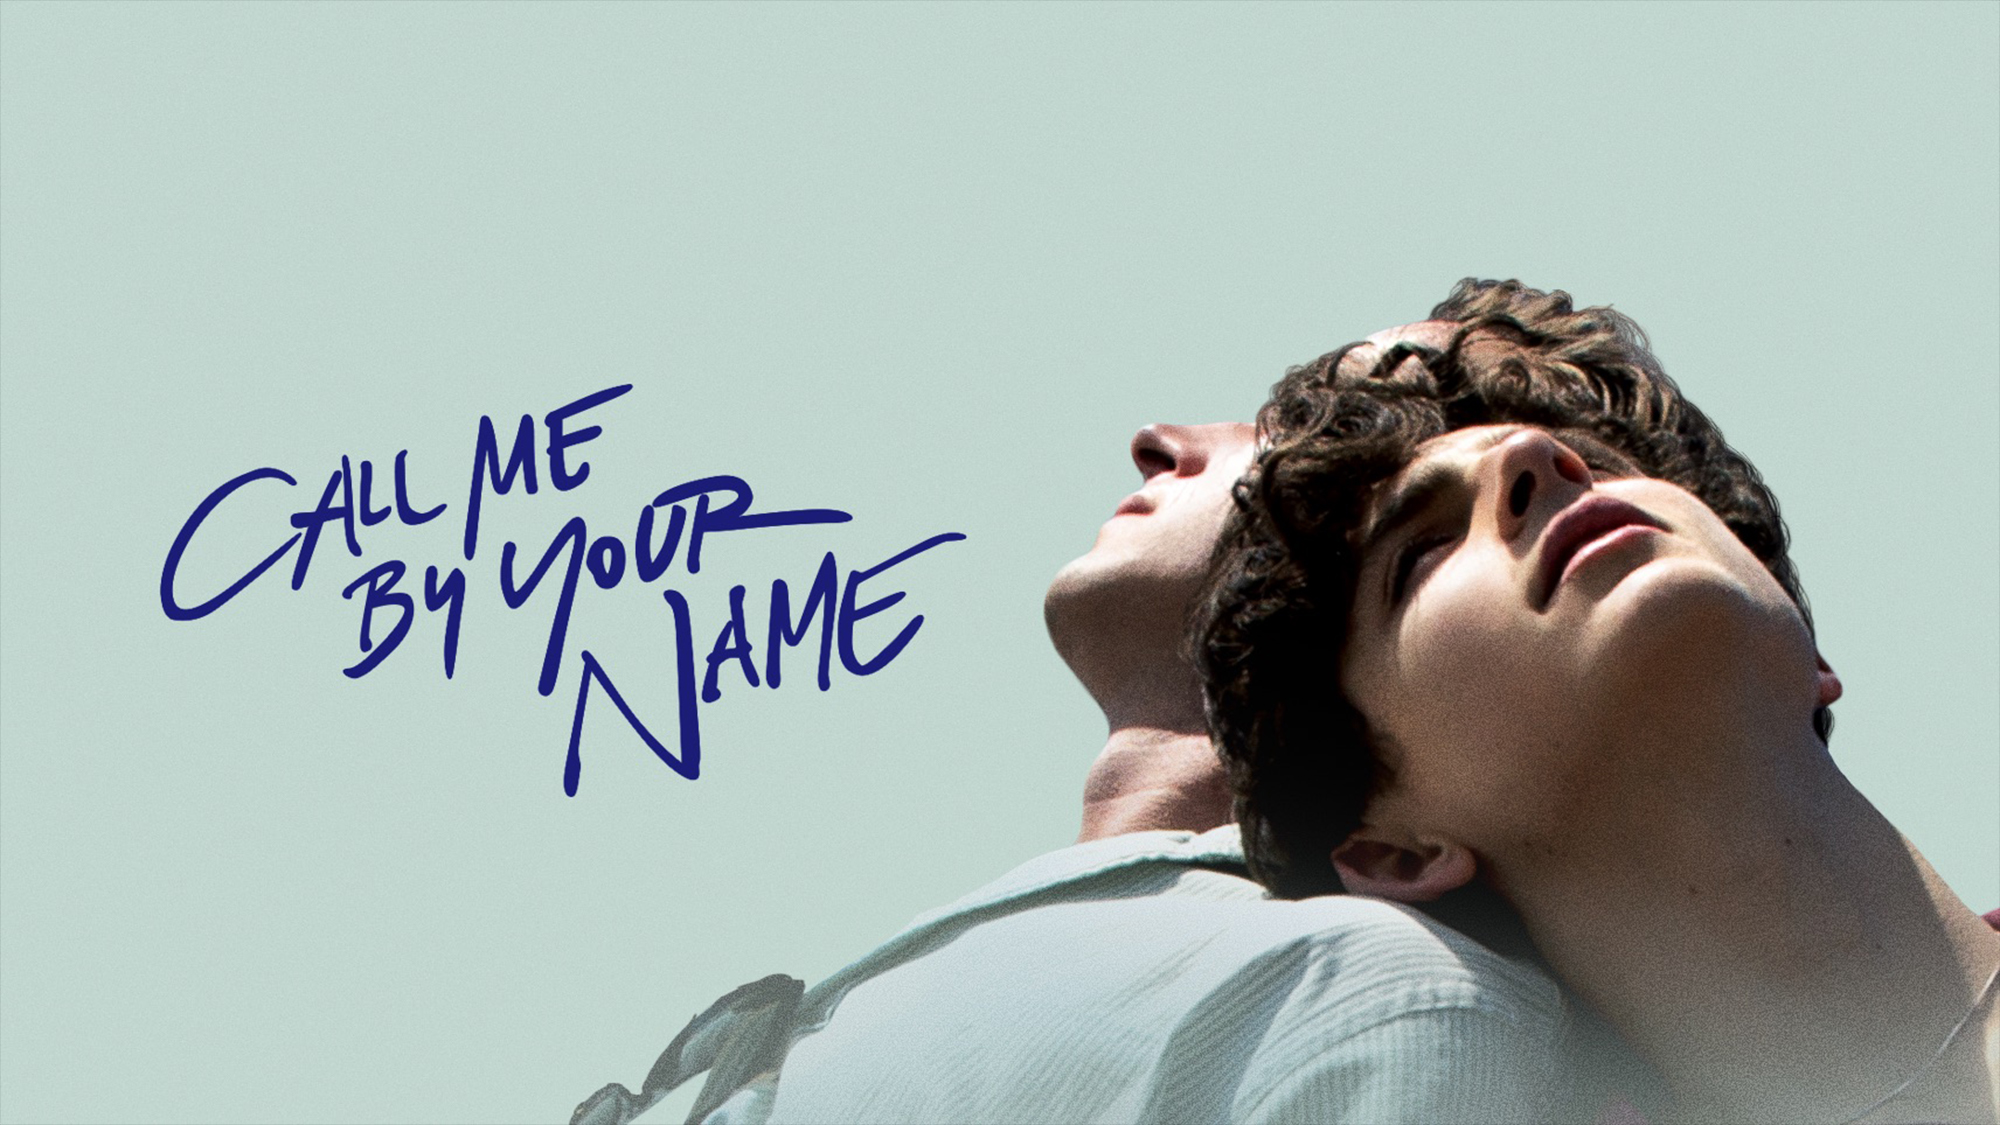 Call Me by Your Name Wallpapers HD  PixelsTalkNet